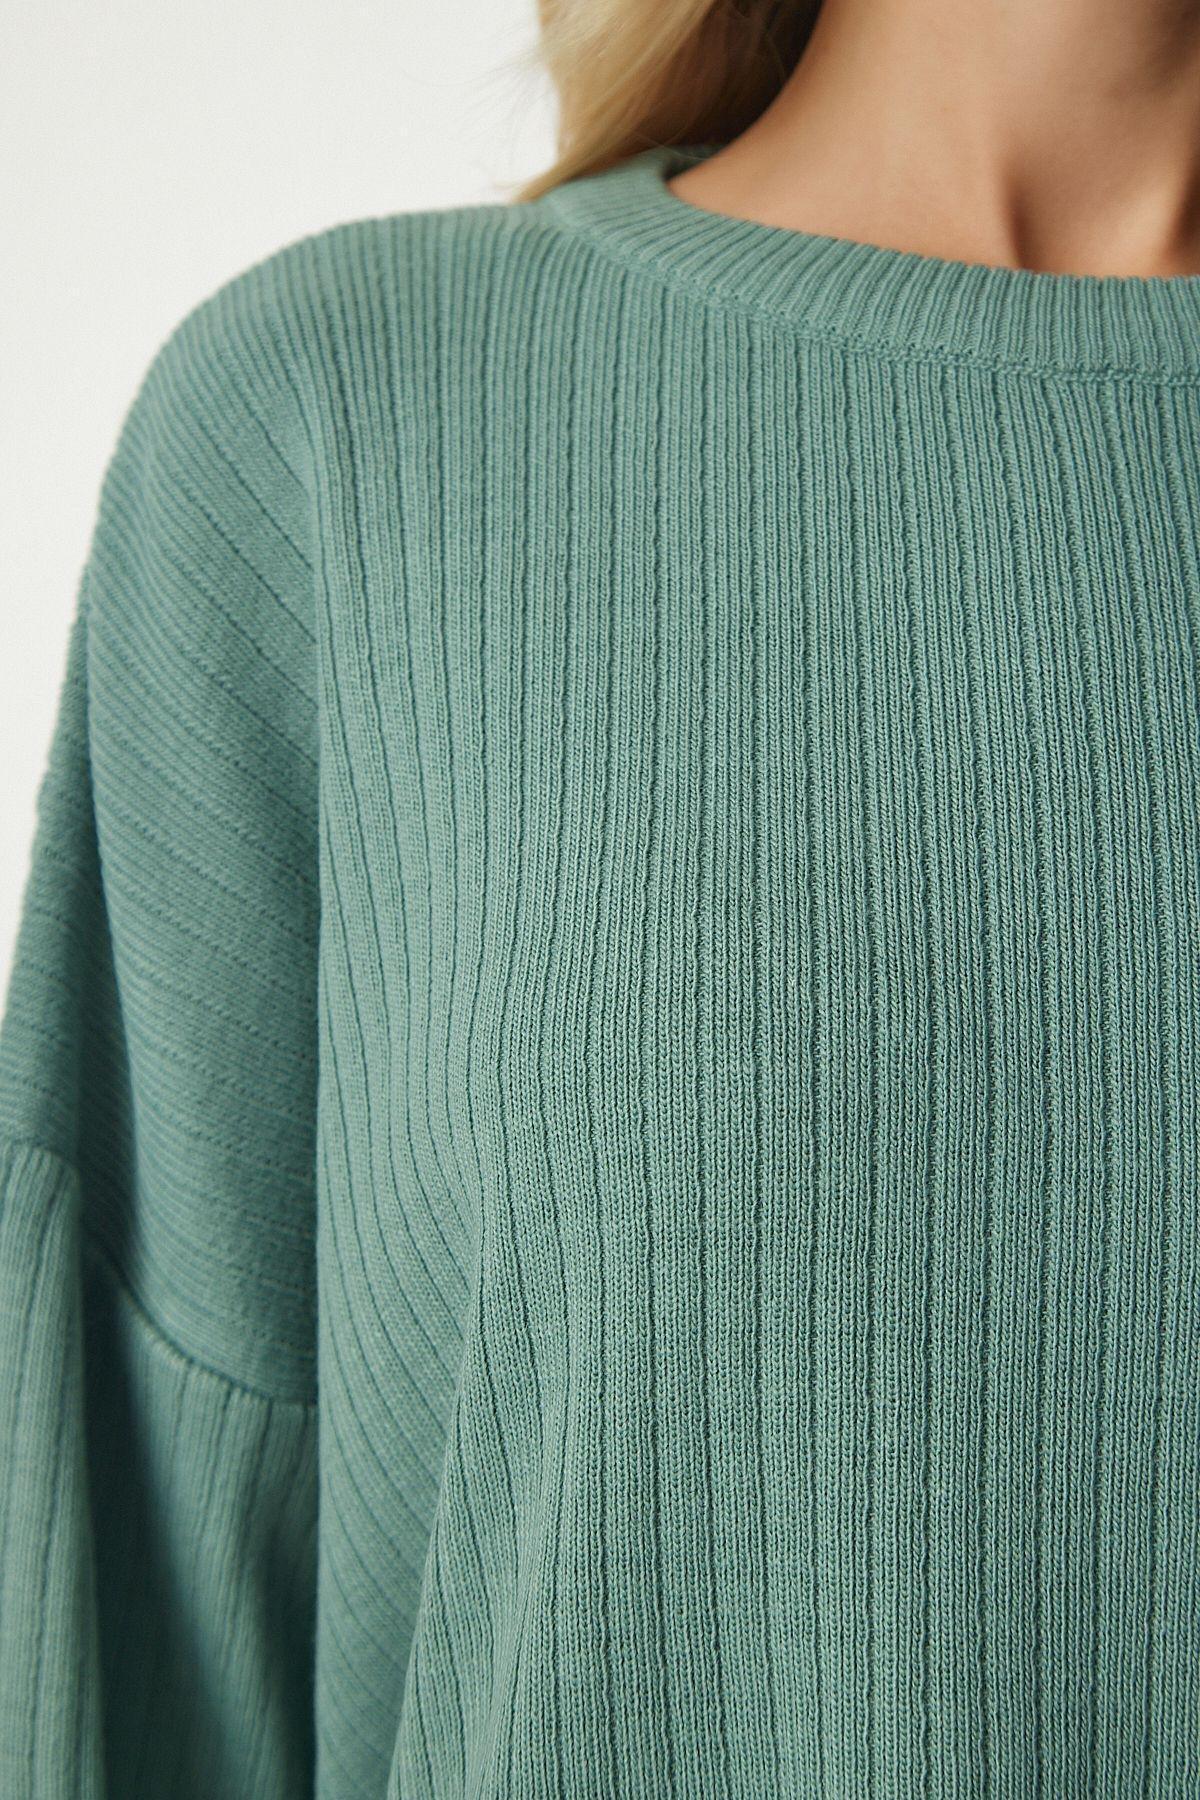 Happiness Istanbul - Turquoise Knitwear Sweater Pants Suit